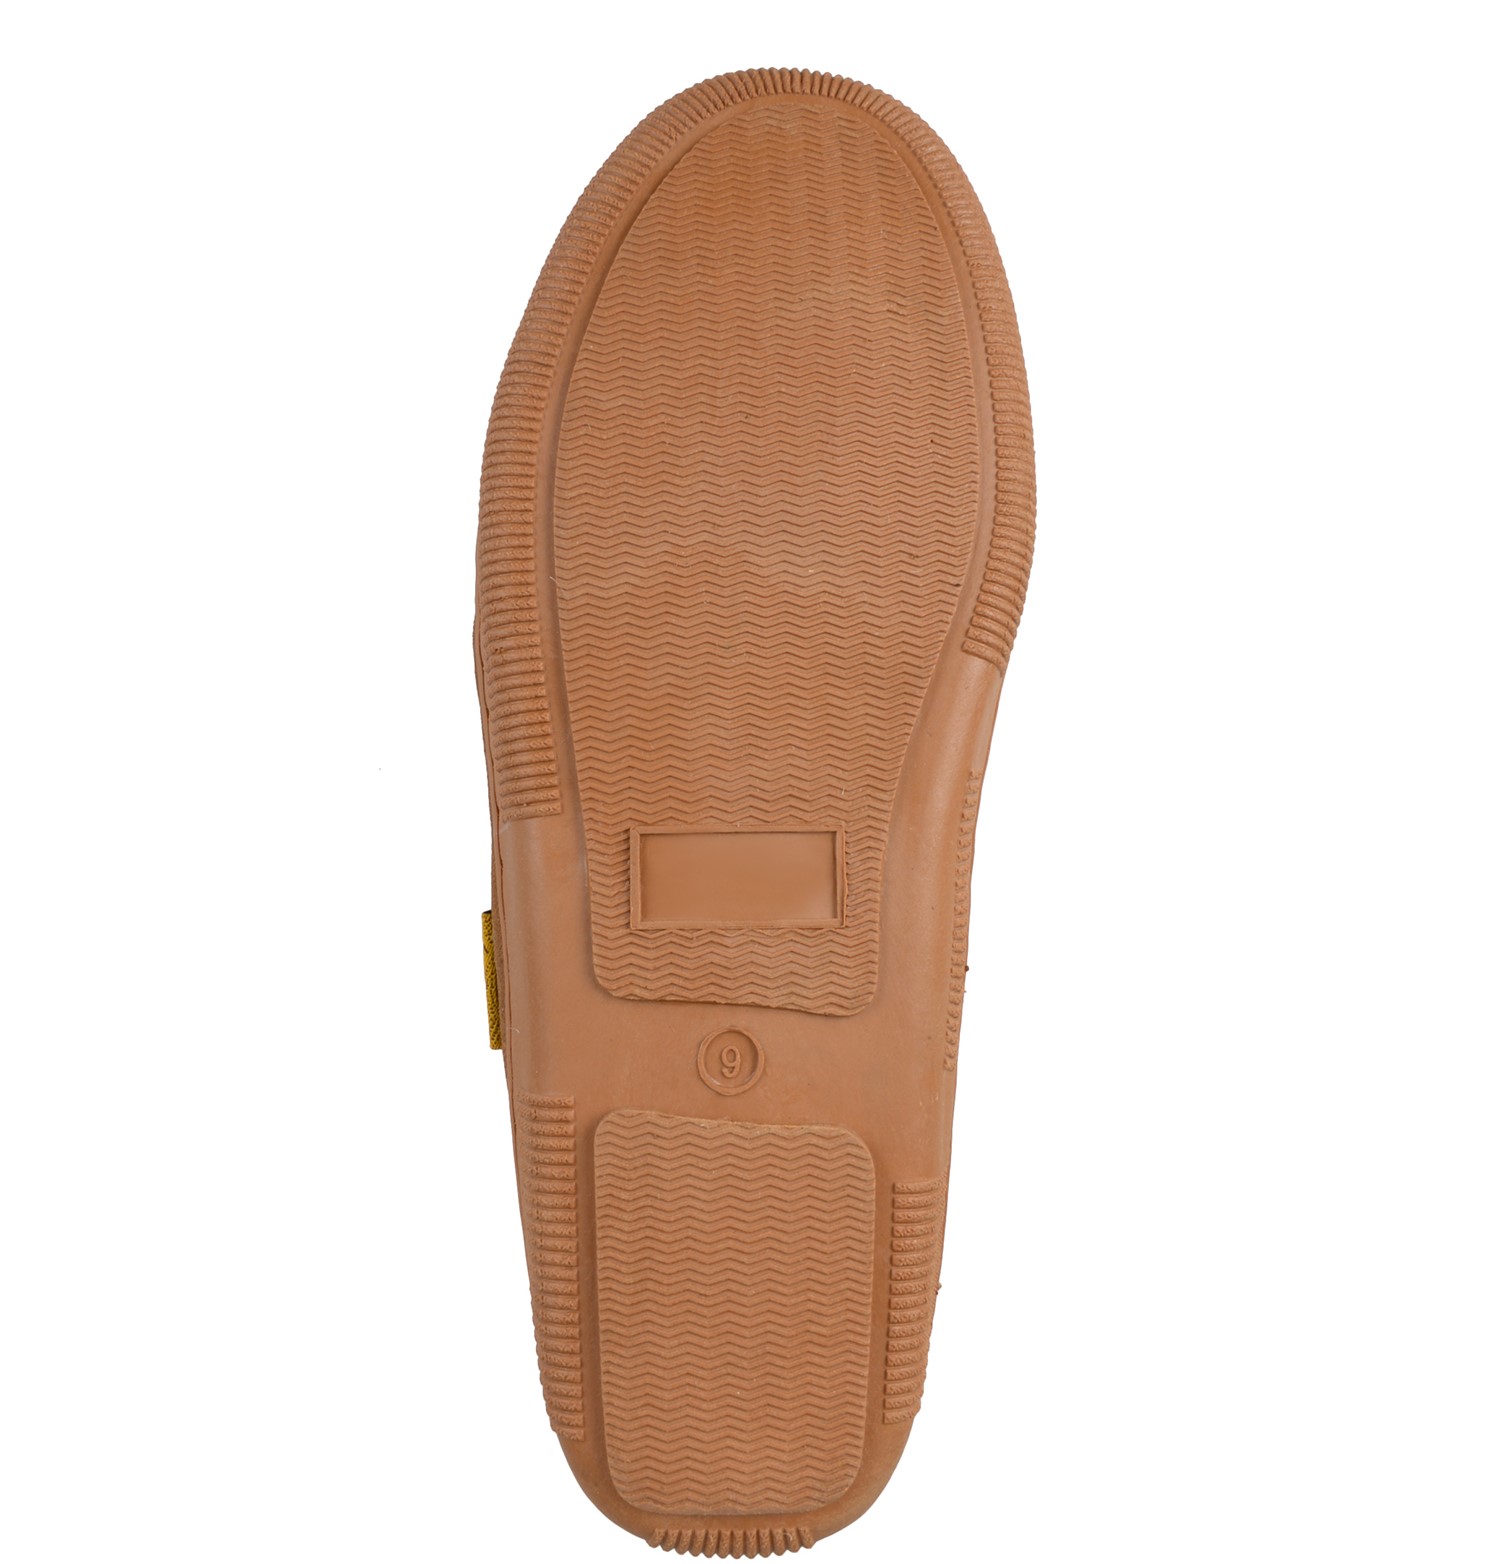 Daxx Men's Hank Leather Moccasin Slipper - image 3 of 6